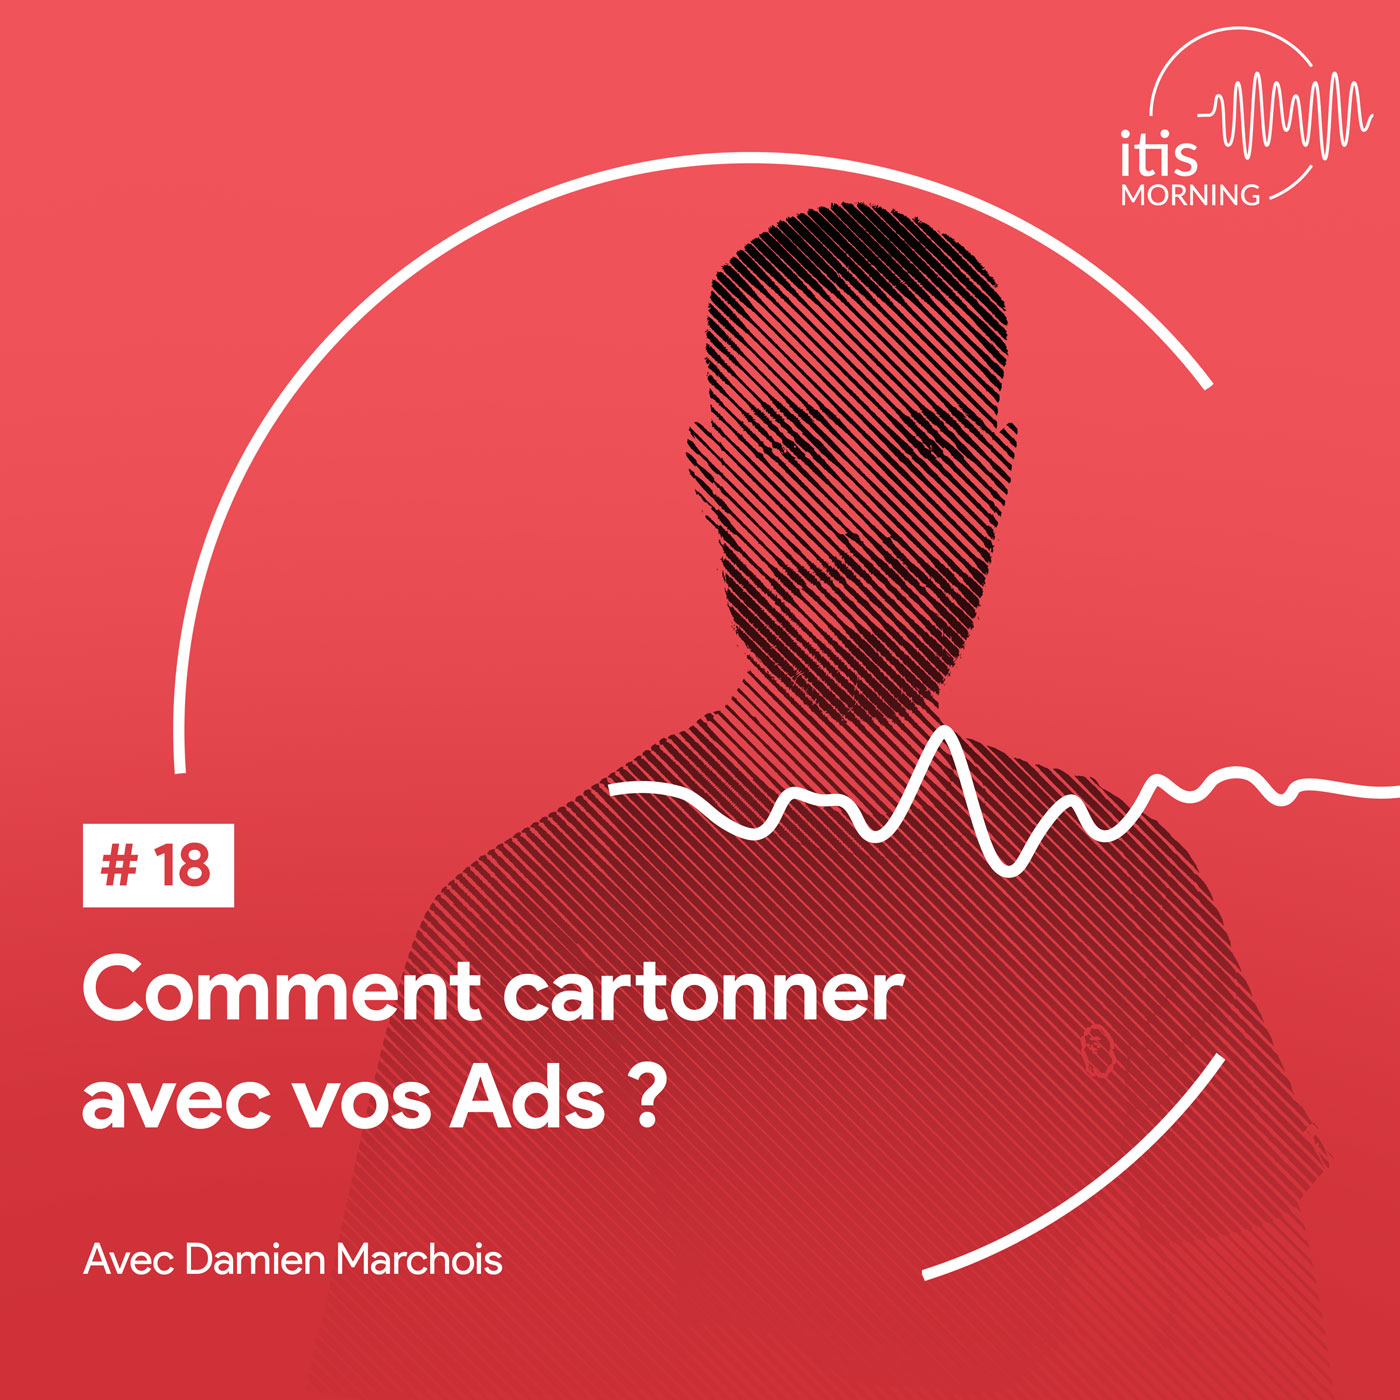 podcast-17-angelo-aouad-hgebergement-pilier-site-ecommerce